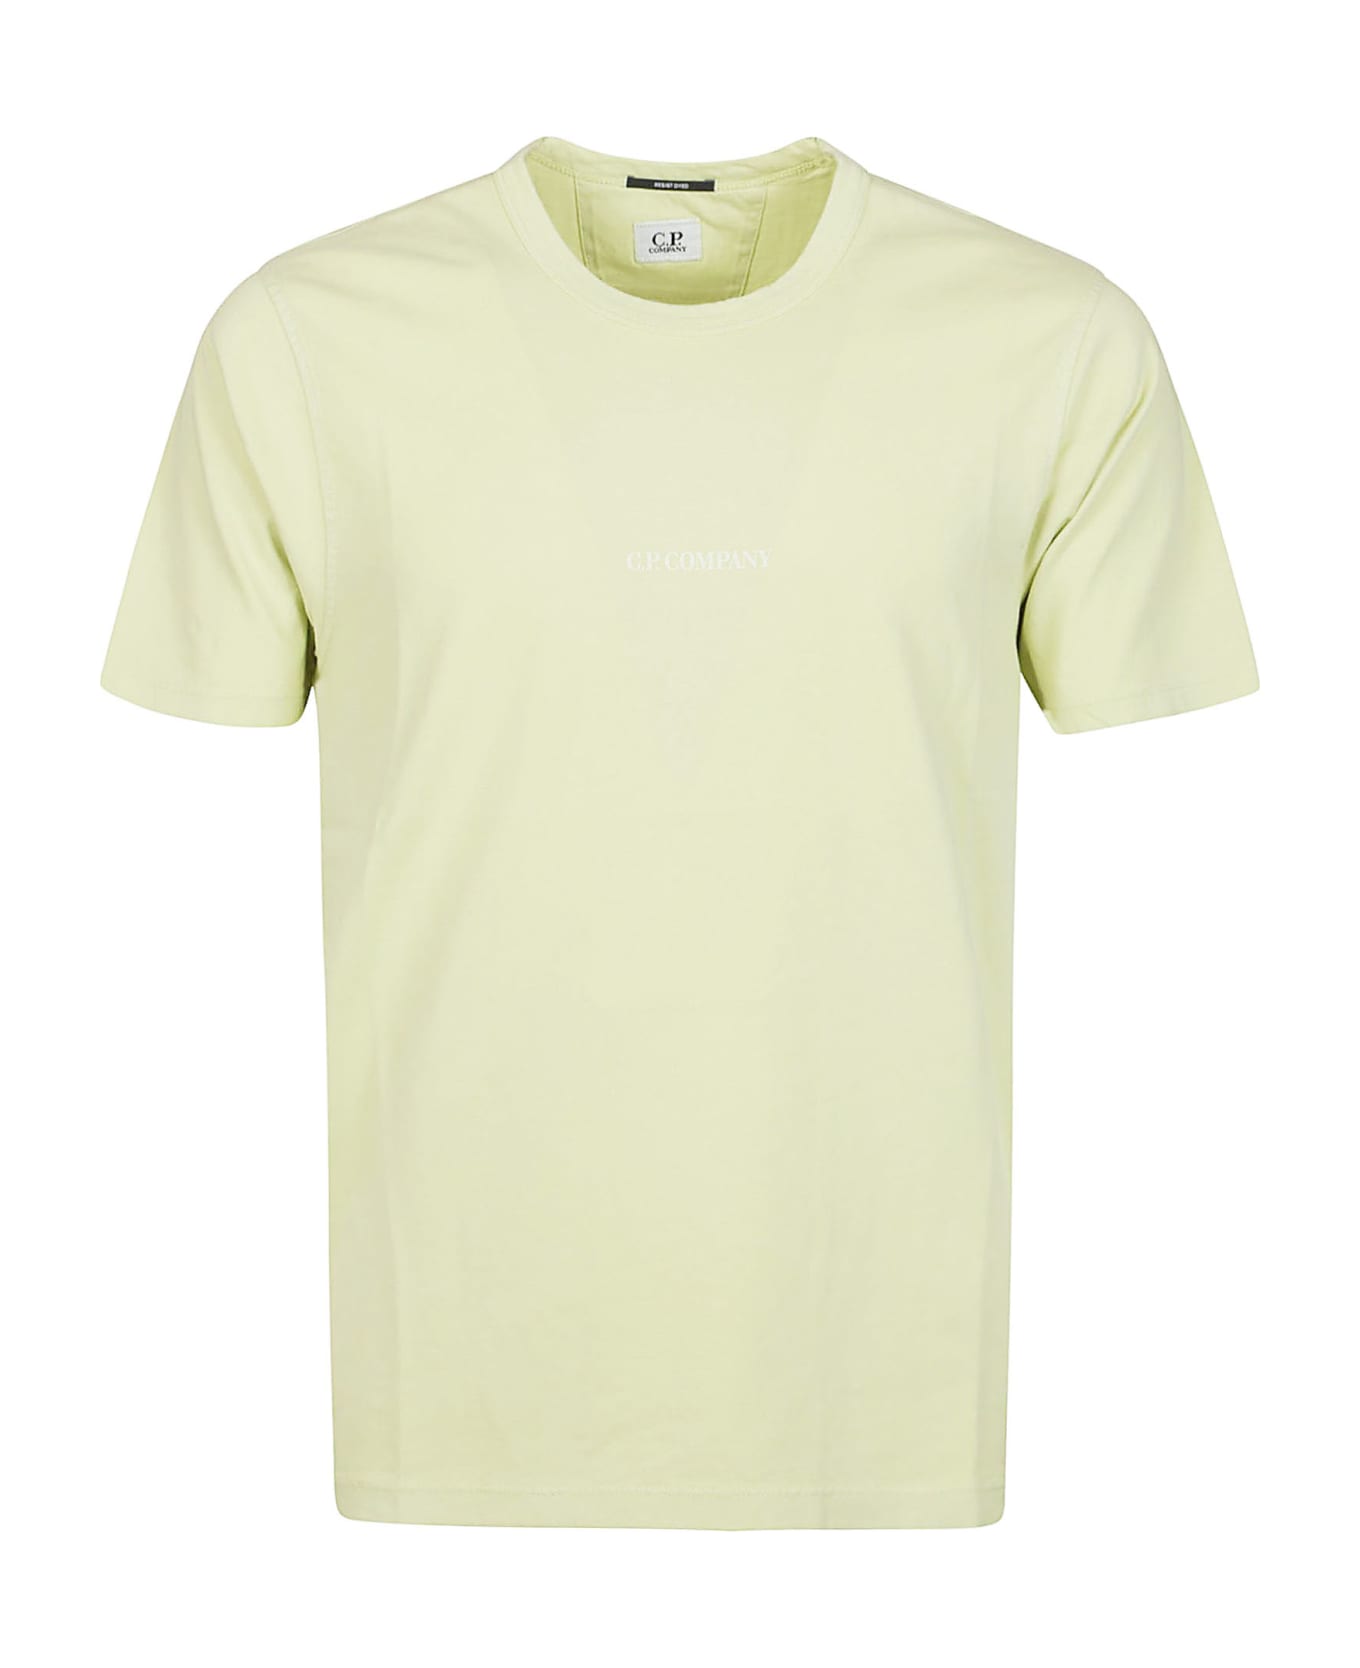 C.P. Company 24/1 Jersey Resist Dyed Logo T-shirt - White Pear